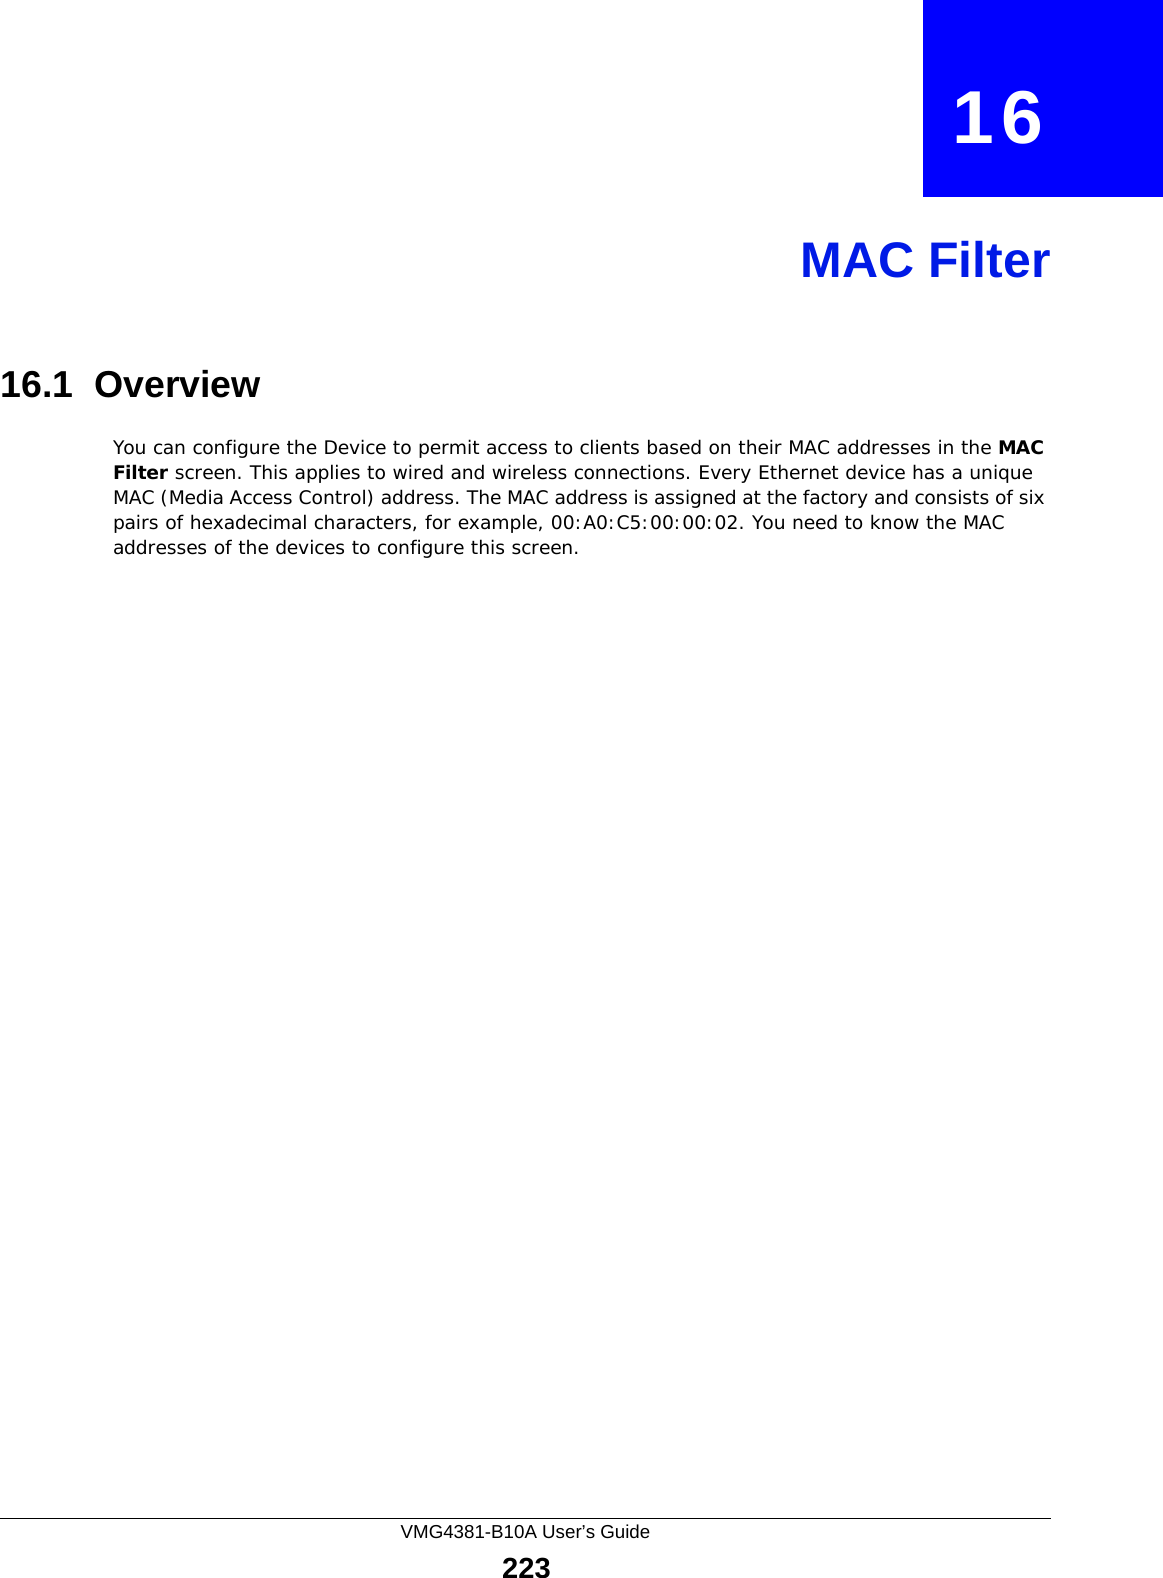 VMG4381-B10A User’s Guide223CHAPTER   16MAC Filter16.1  Overview You can configure the Device to permit access to clients based on their MAC addresses in the MAC Filter screen. This applies to wired and wireless connections. Every Ethernet device has a unique MAC (Media Access Control) address. The MAC address is assigned at the factory and consists of six pairs of hexadecimal characters, for example, 00:A0:C5:00:00:02. You need to know the MAC addresses of the devices to configure this screen.